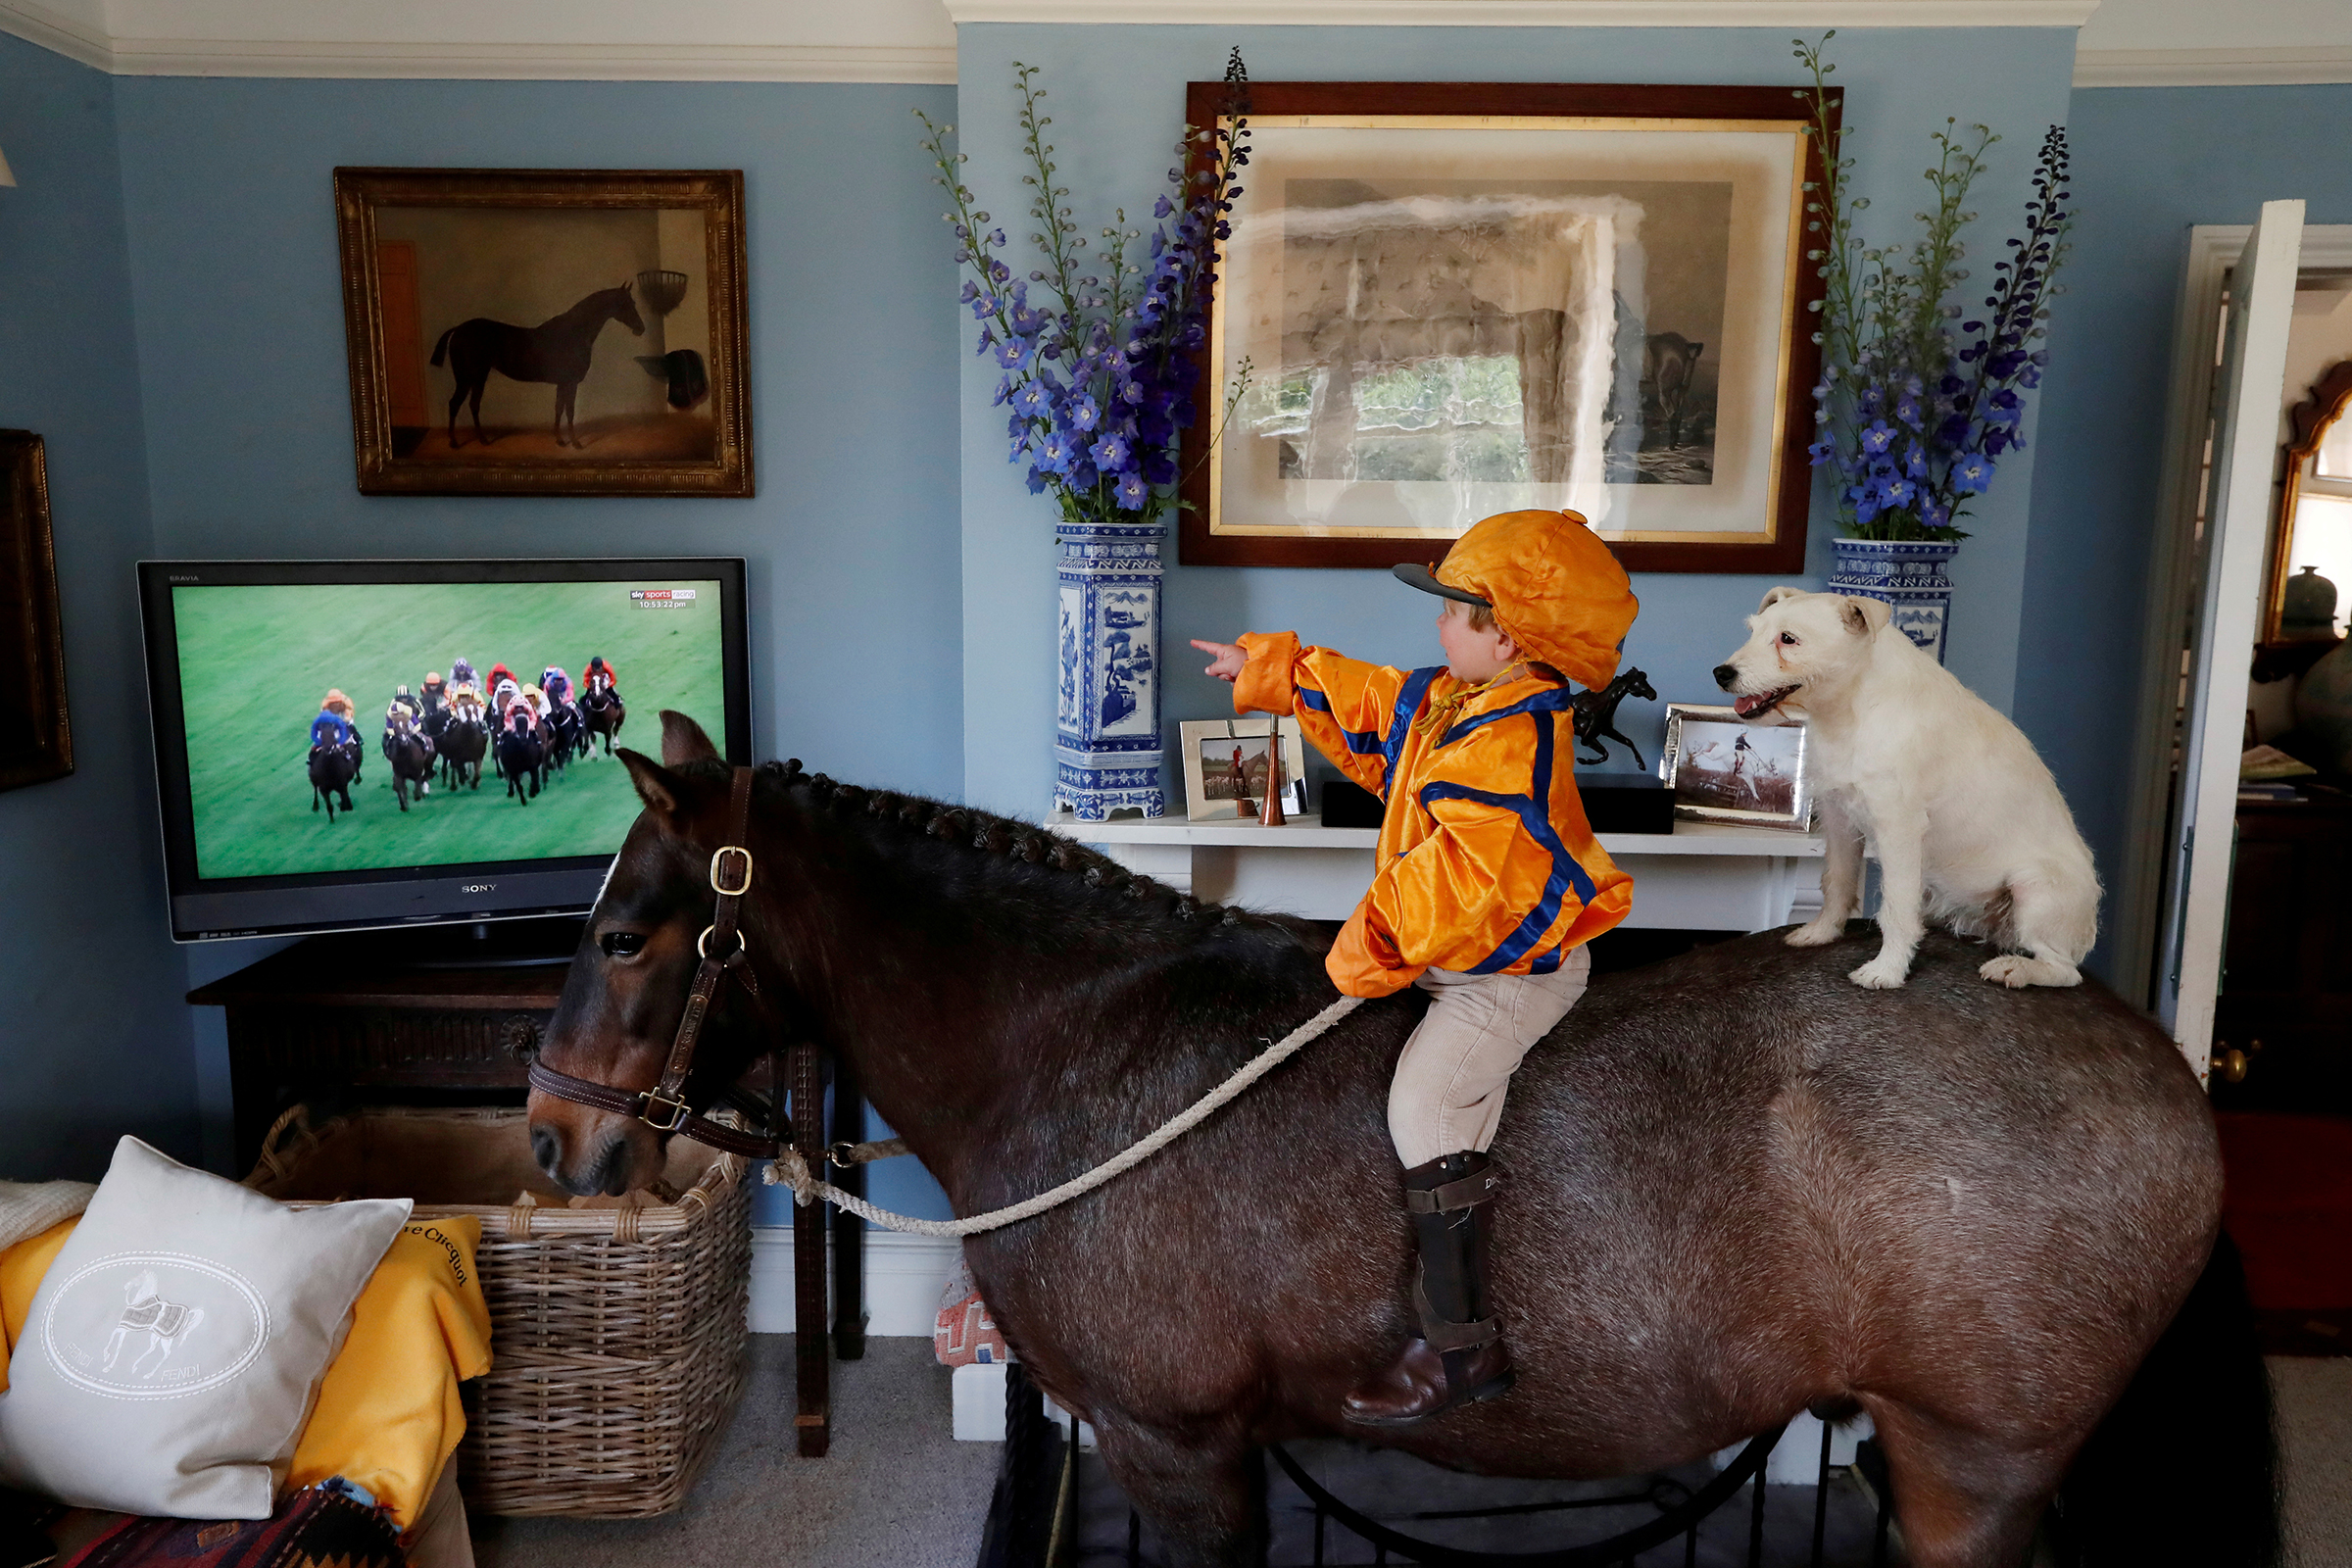 Merlin Coles, 3, watches horse racing at Royal Ascot from his home in Bere Regis, England, on June 17. The boy is sitting on his horse, Mr. Glitter Sparkles, with his dog, Mistress, as racing resumed behind closed doors. (Paul Childs—Reuters)